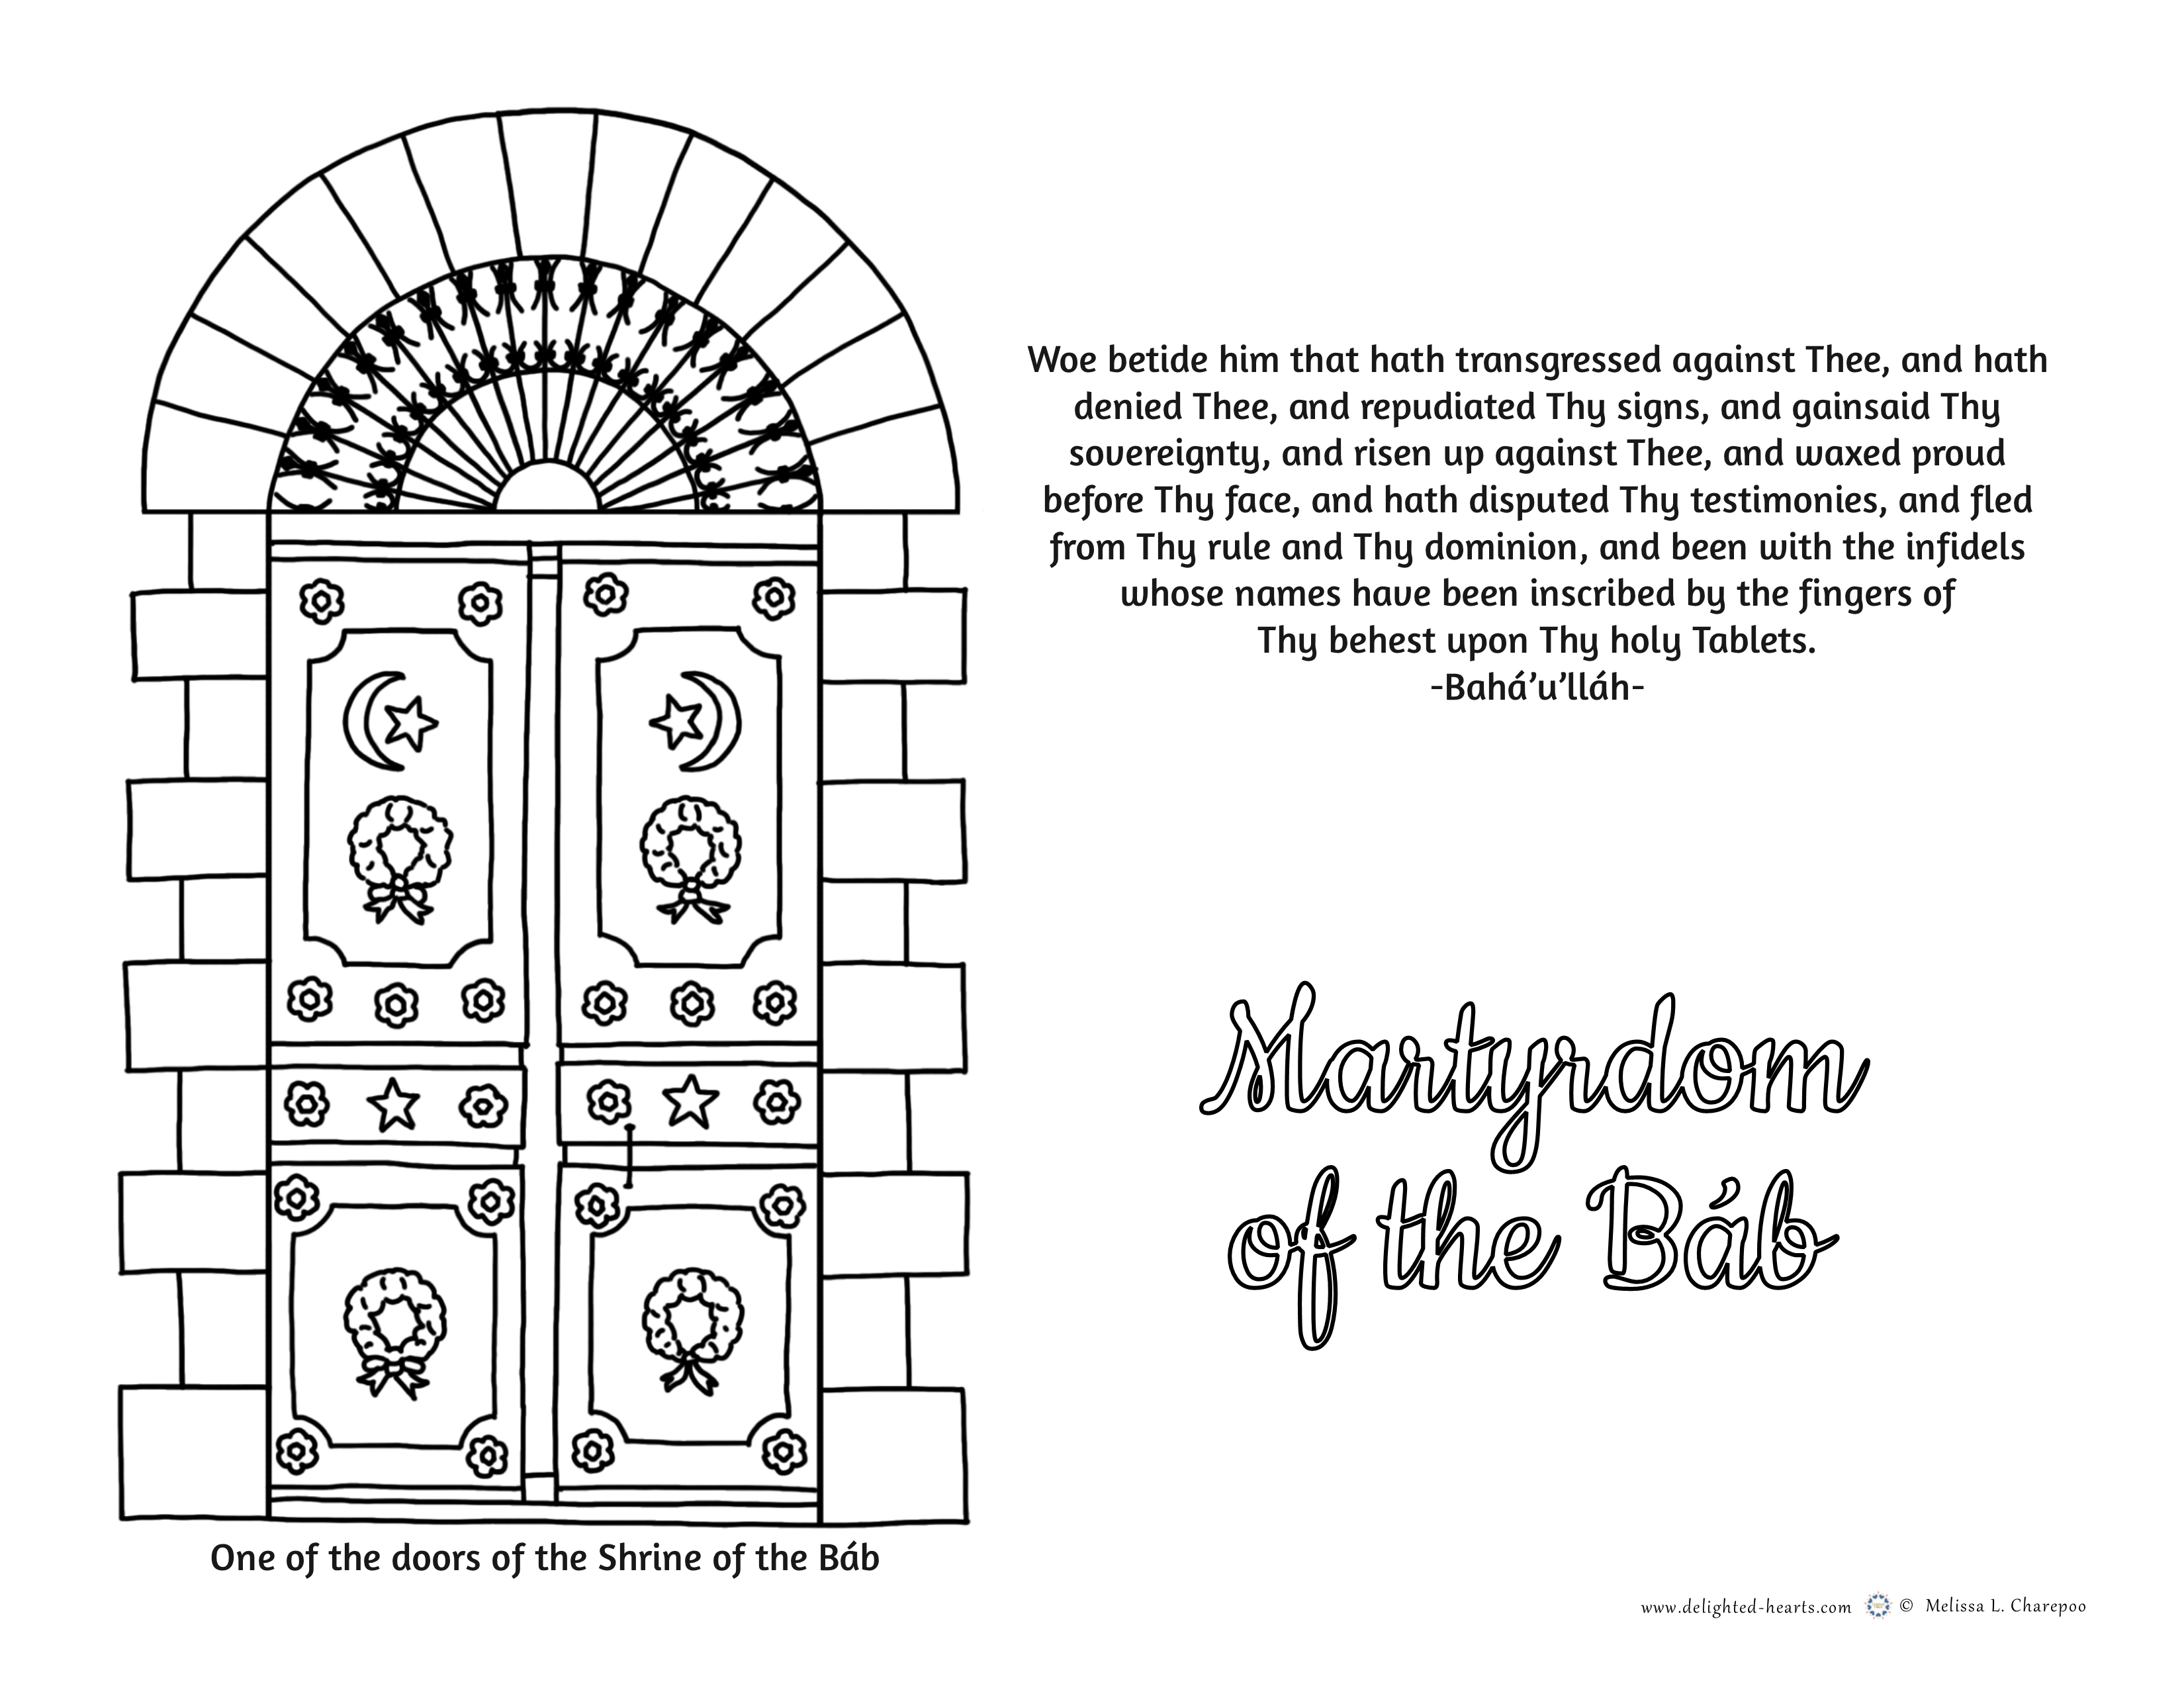 175_DHLLC_Melissa Charepoo_Coloring Page_Martyrdom of the Bab.png